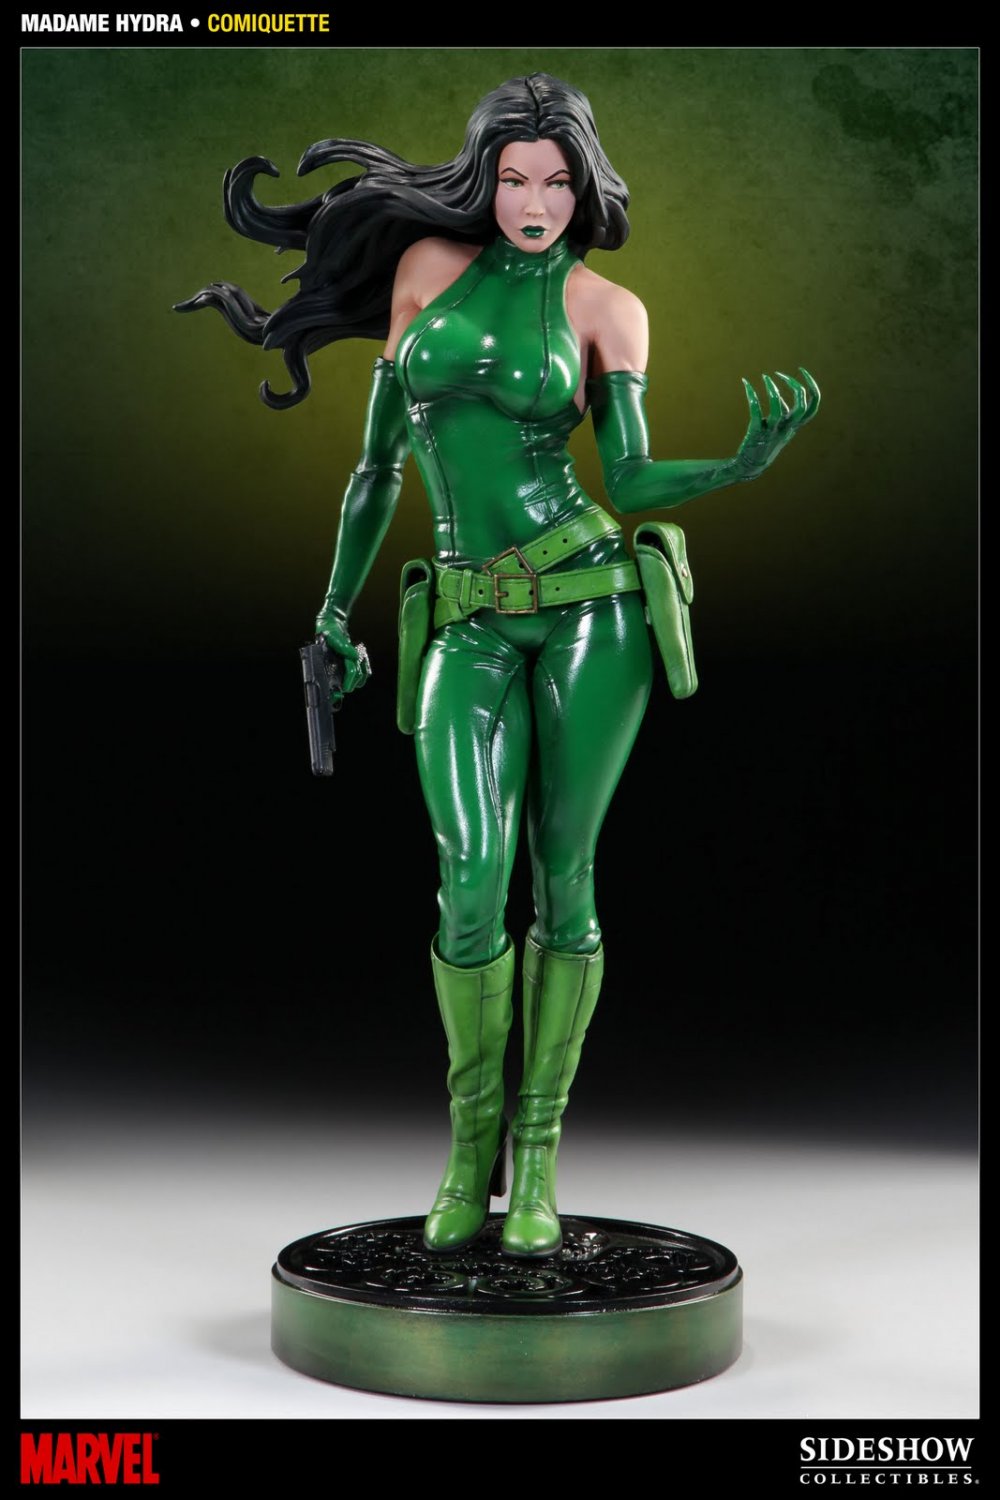 SOLD Sideshow Madame Hydra Comiquette Regular , limited to 1000 Like new.